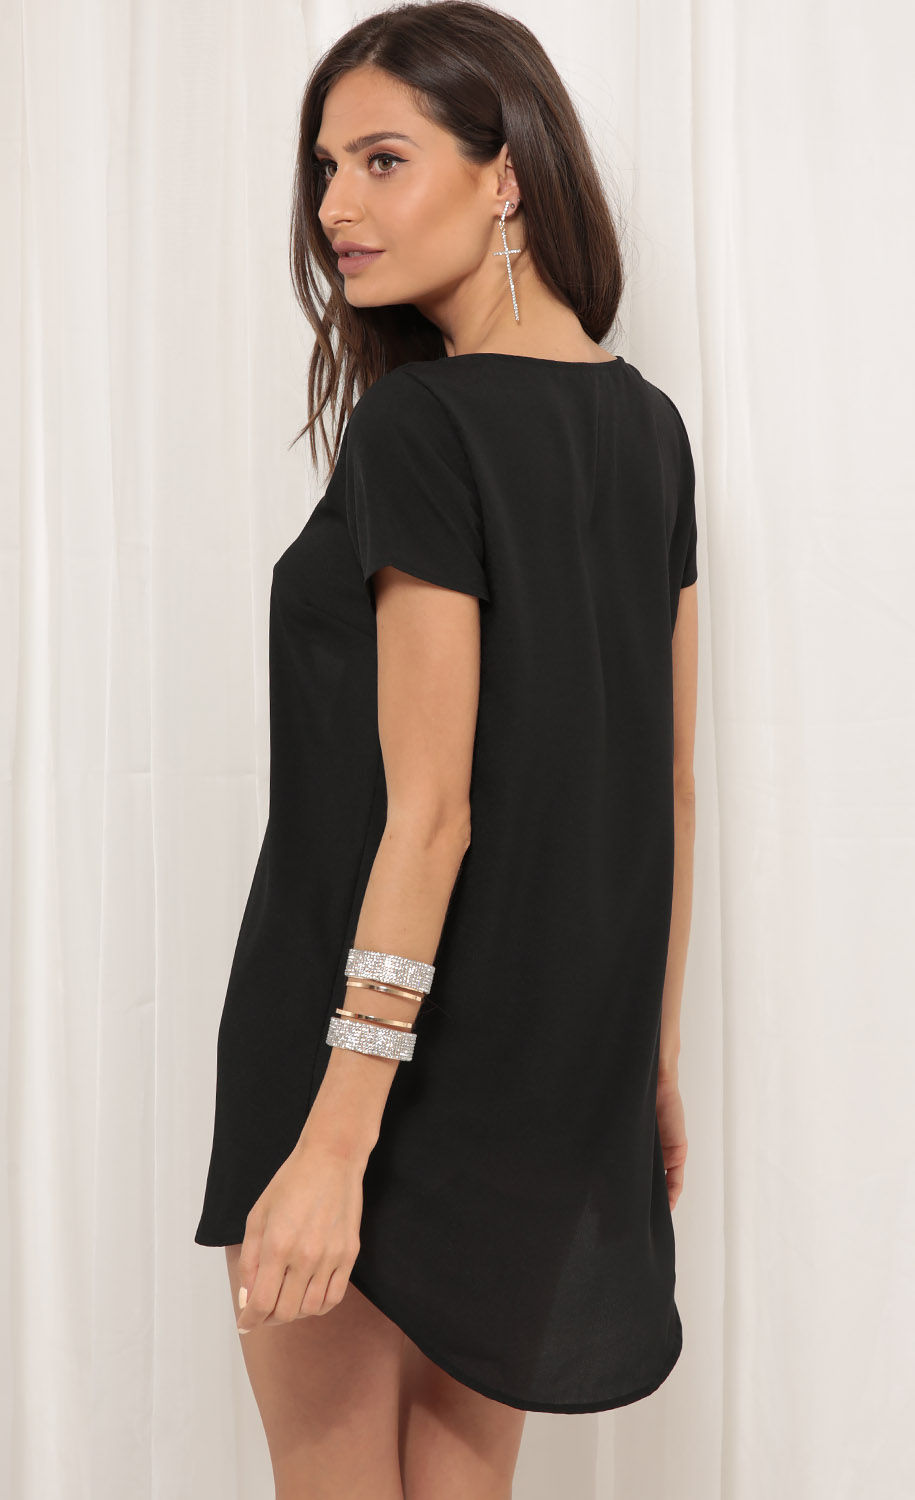 Party dresses > Shimmer Peek-a-boo Plunge Shift Dress